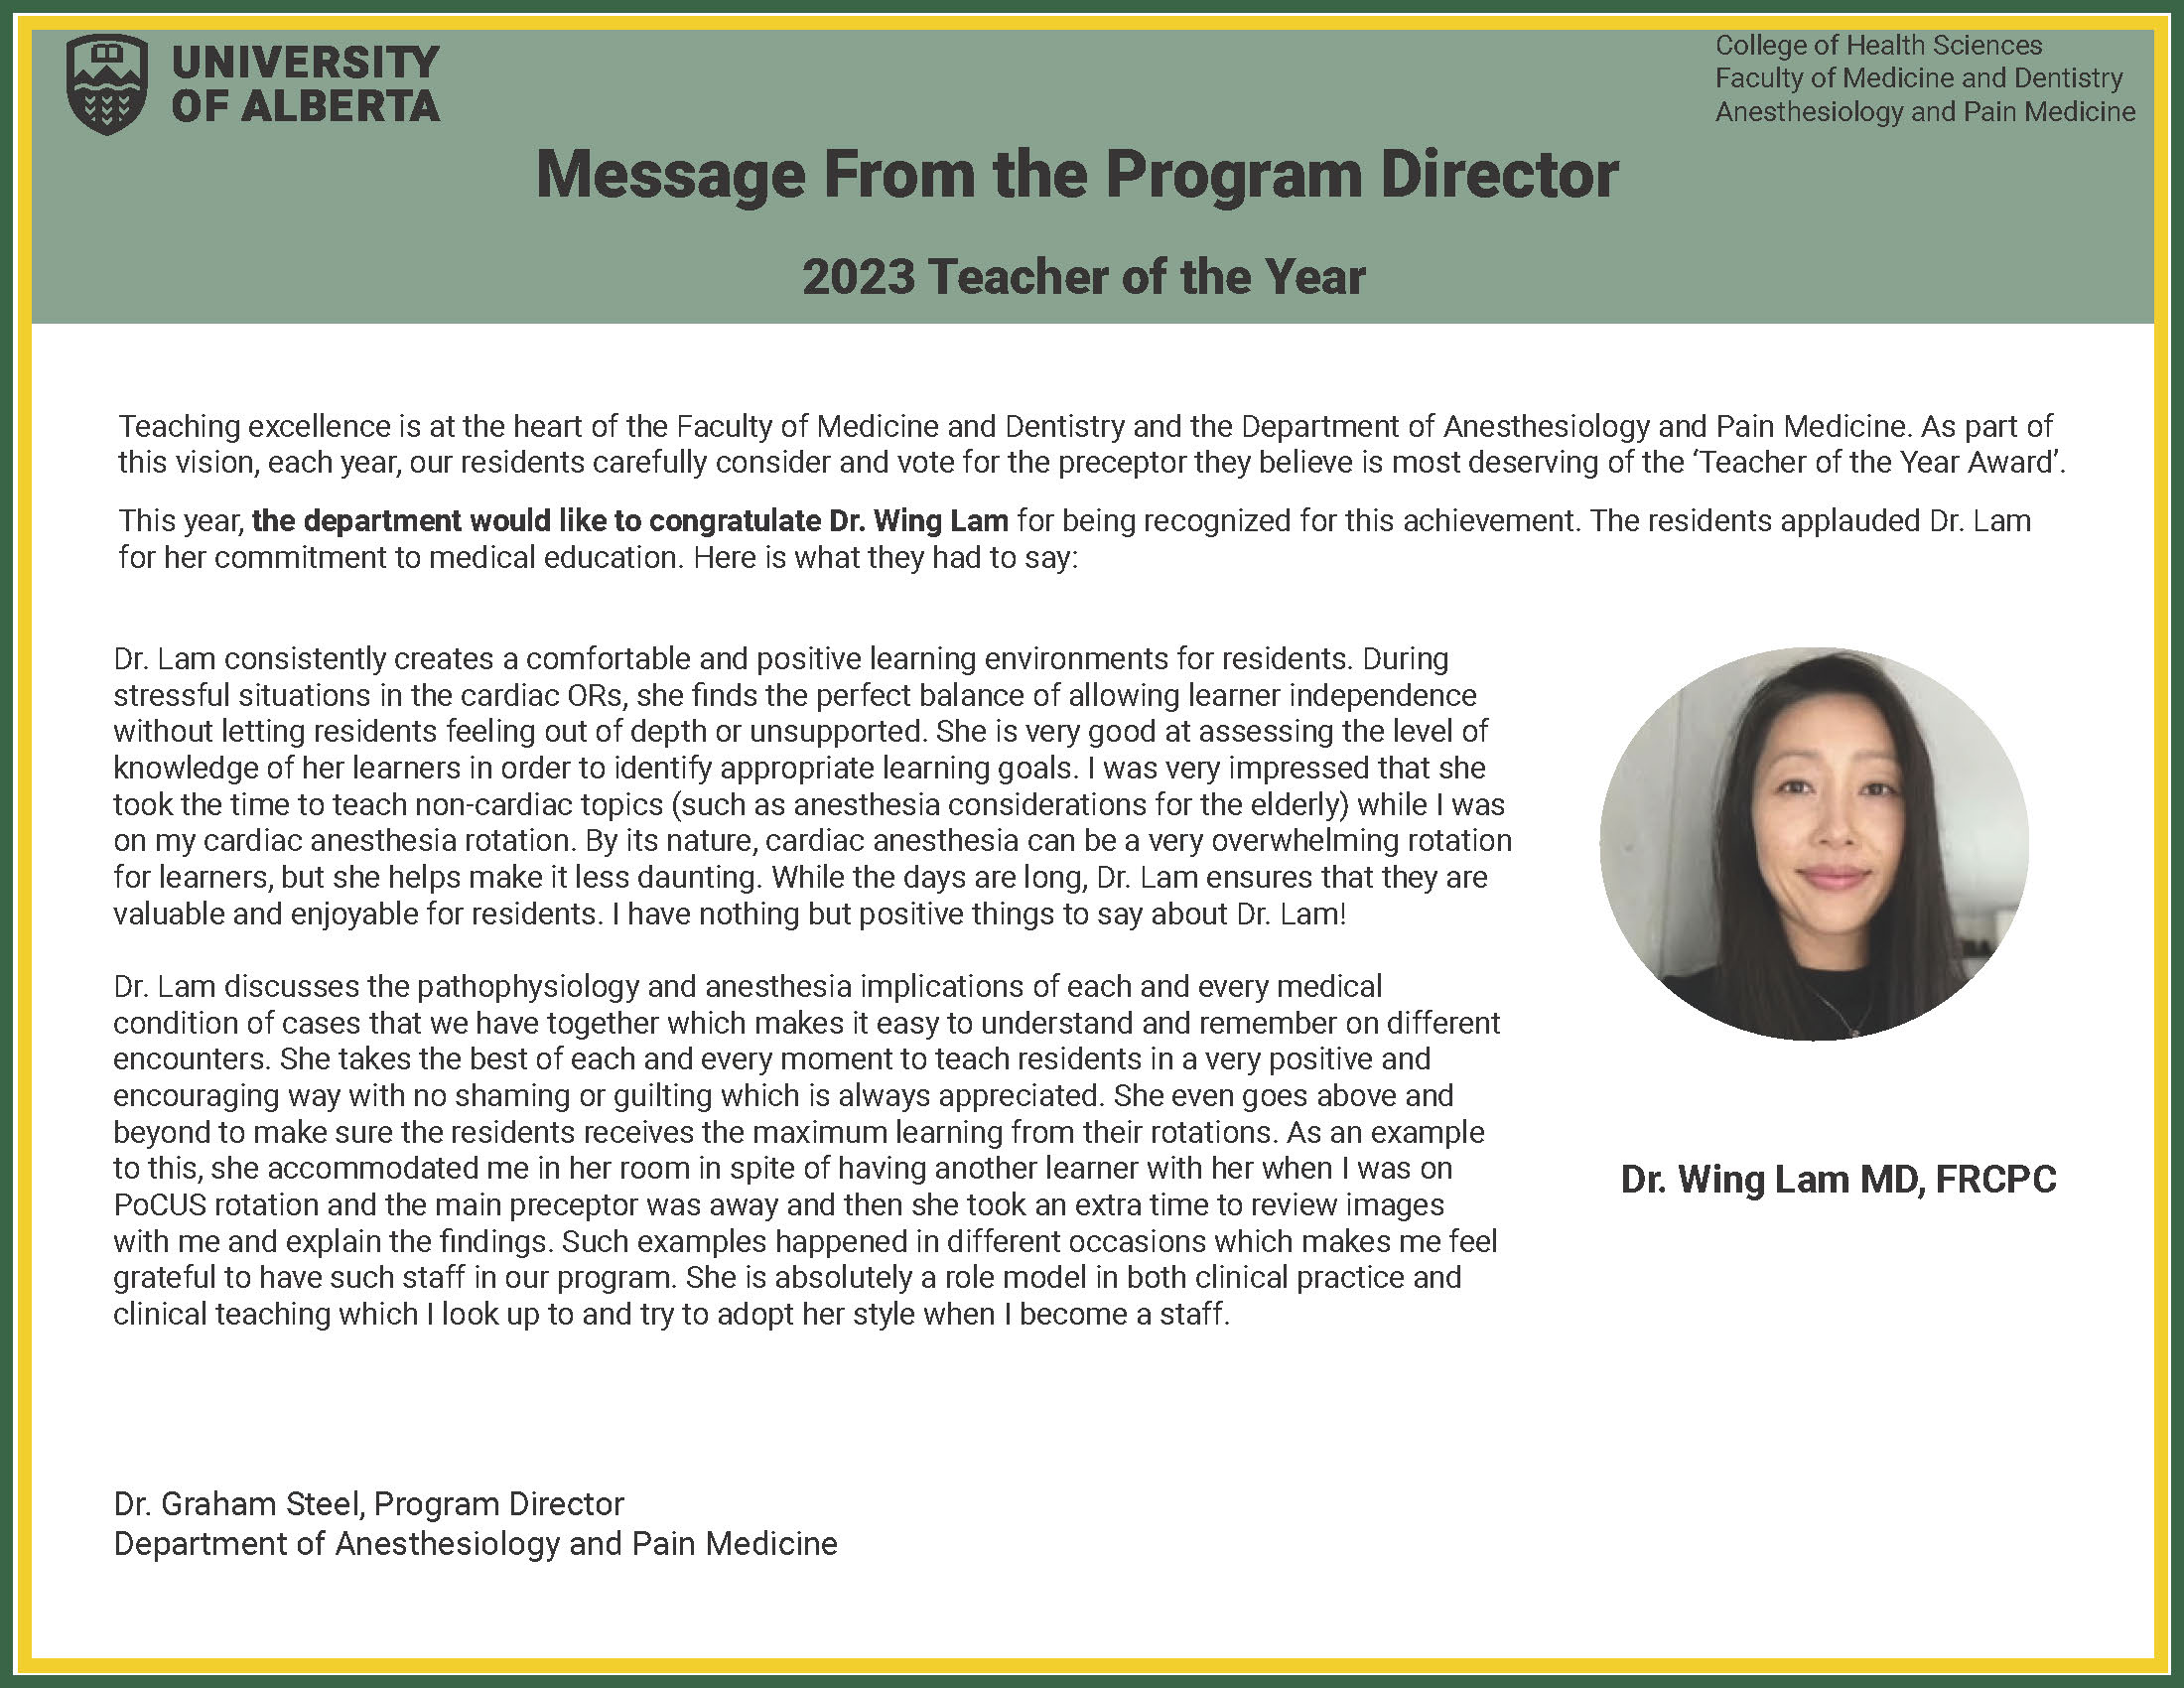  APM 2023 Teacher of the Year Dr. Wing Lam